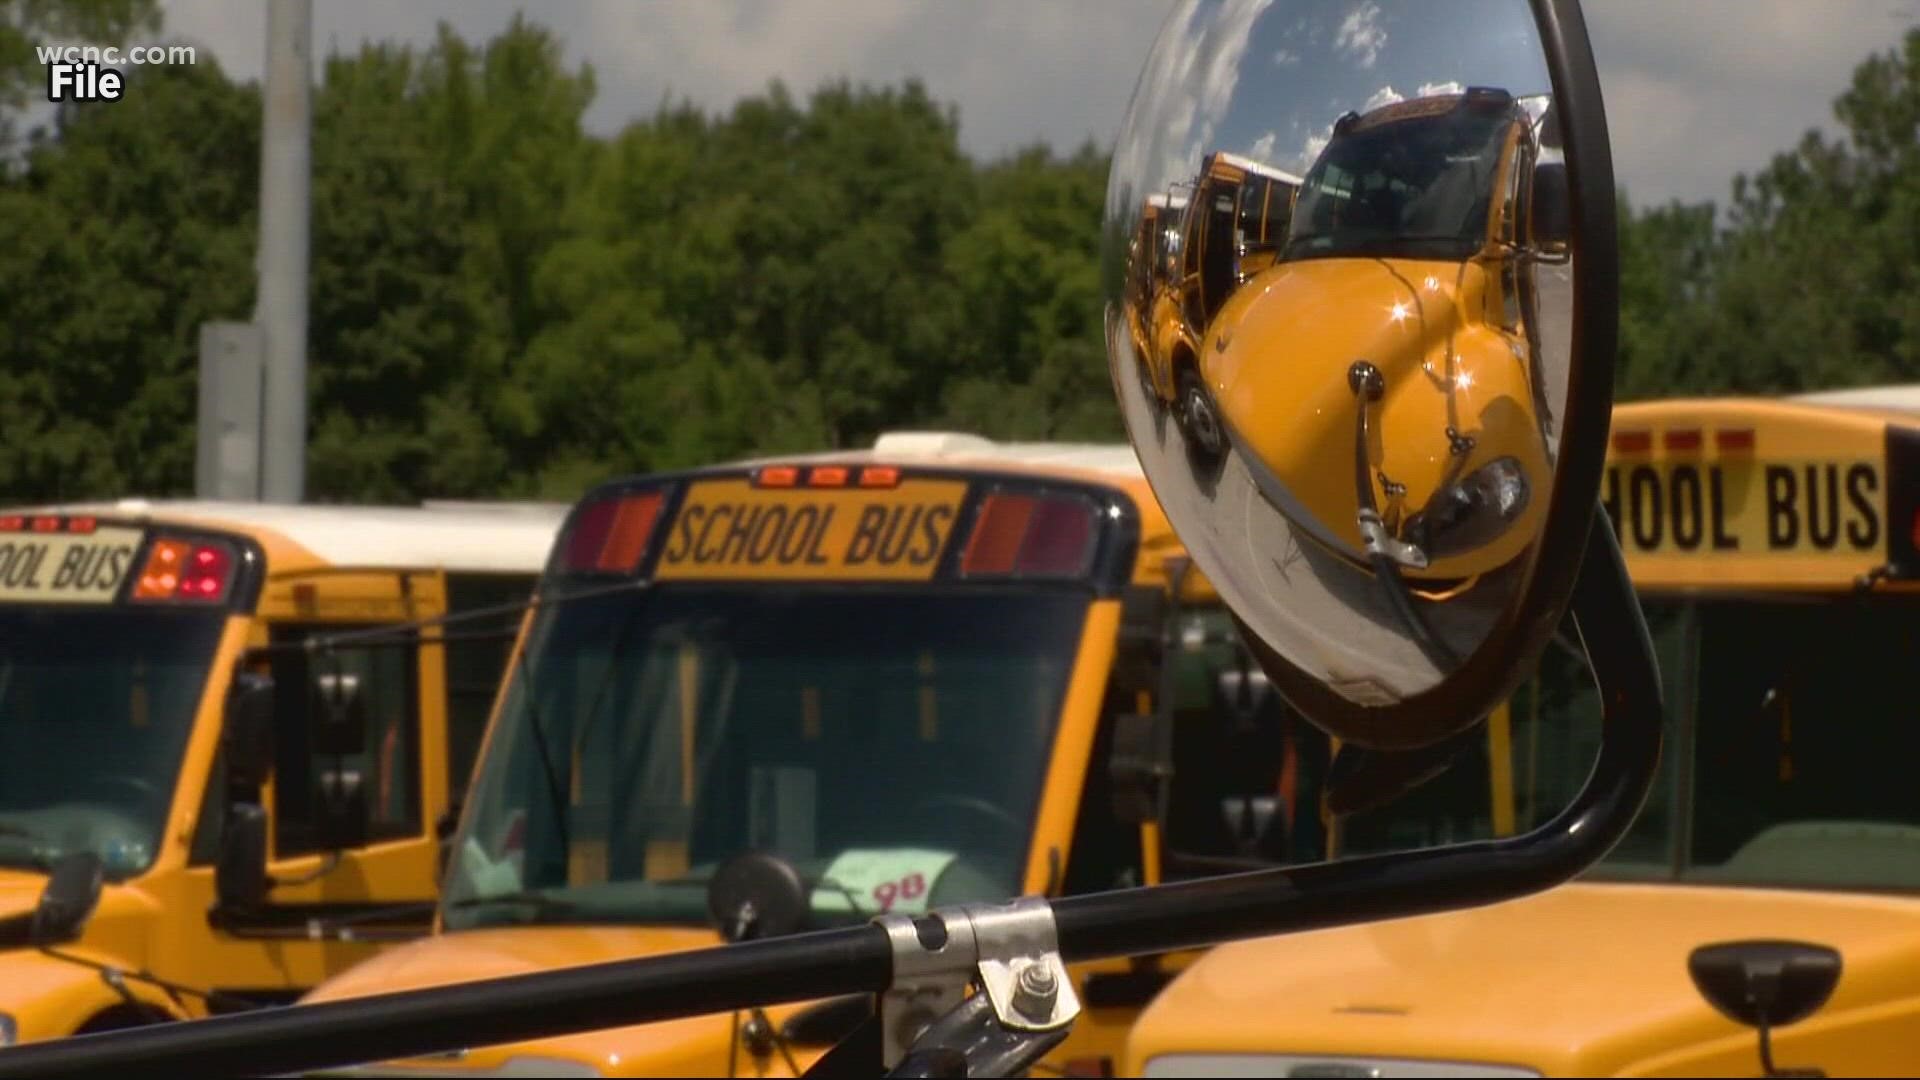 School bus drivers rallied Friday outside the North Carolina General Assembly building, saying they are overworked and underpaid.